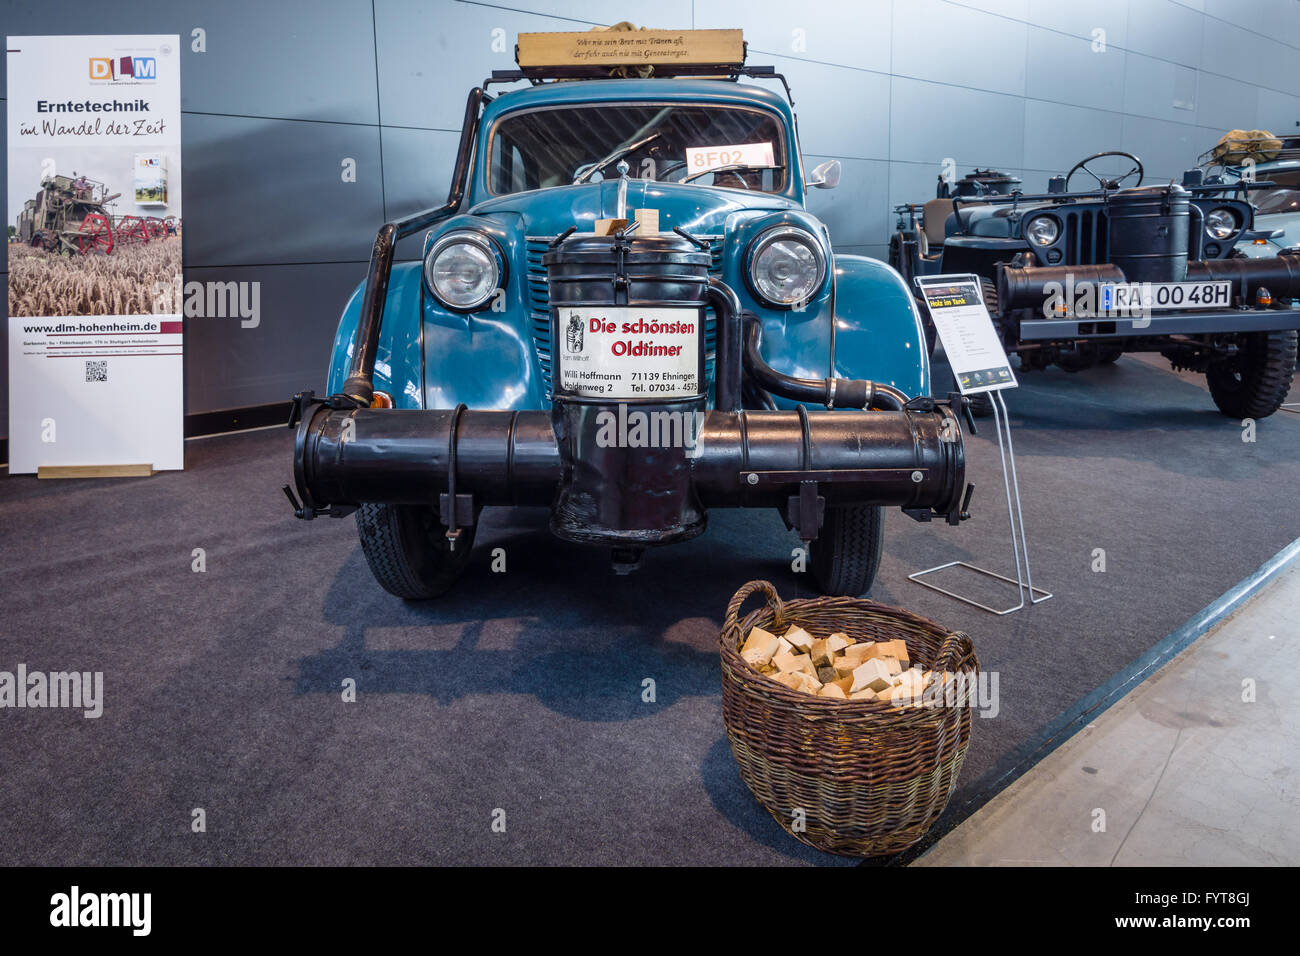 Compact car Opel Olympia OL38, 1938 with wood gas generator by Zanker, 1942  Stock Photo - Alamy